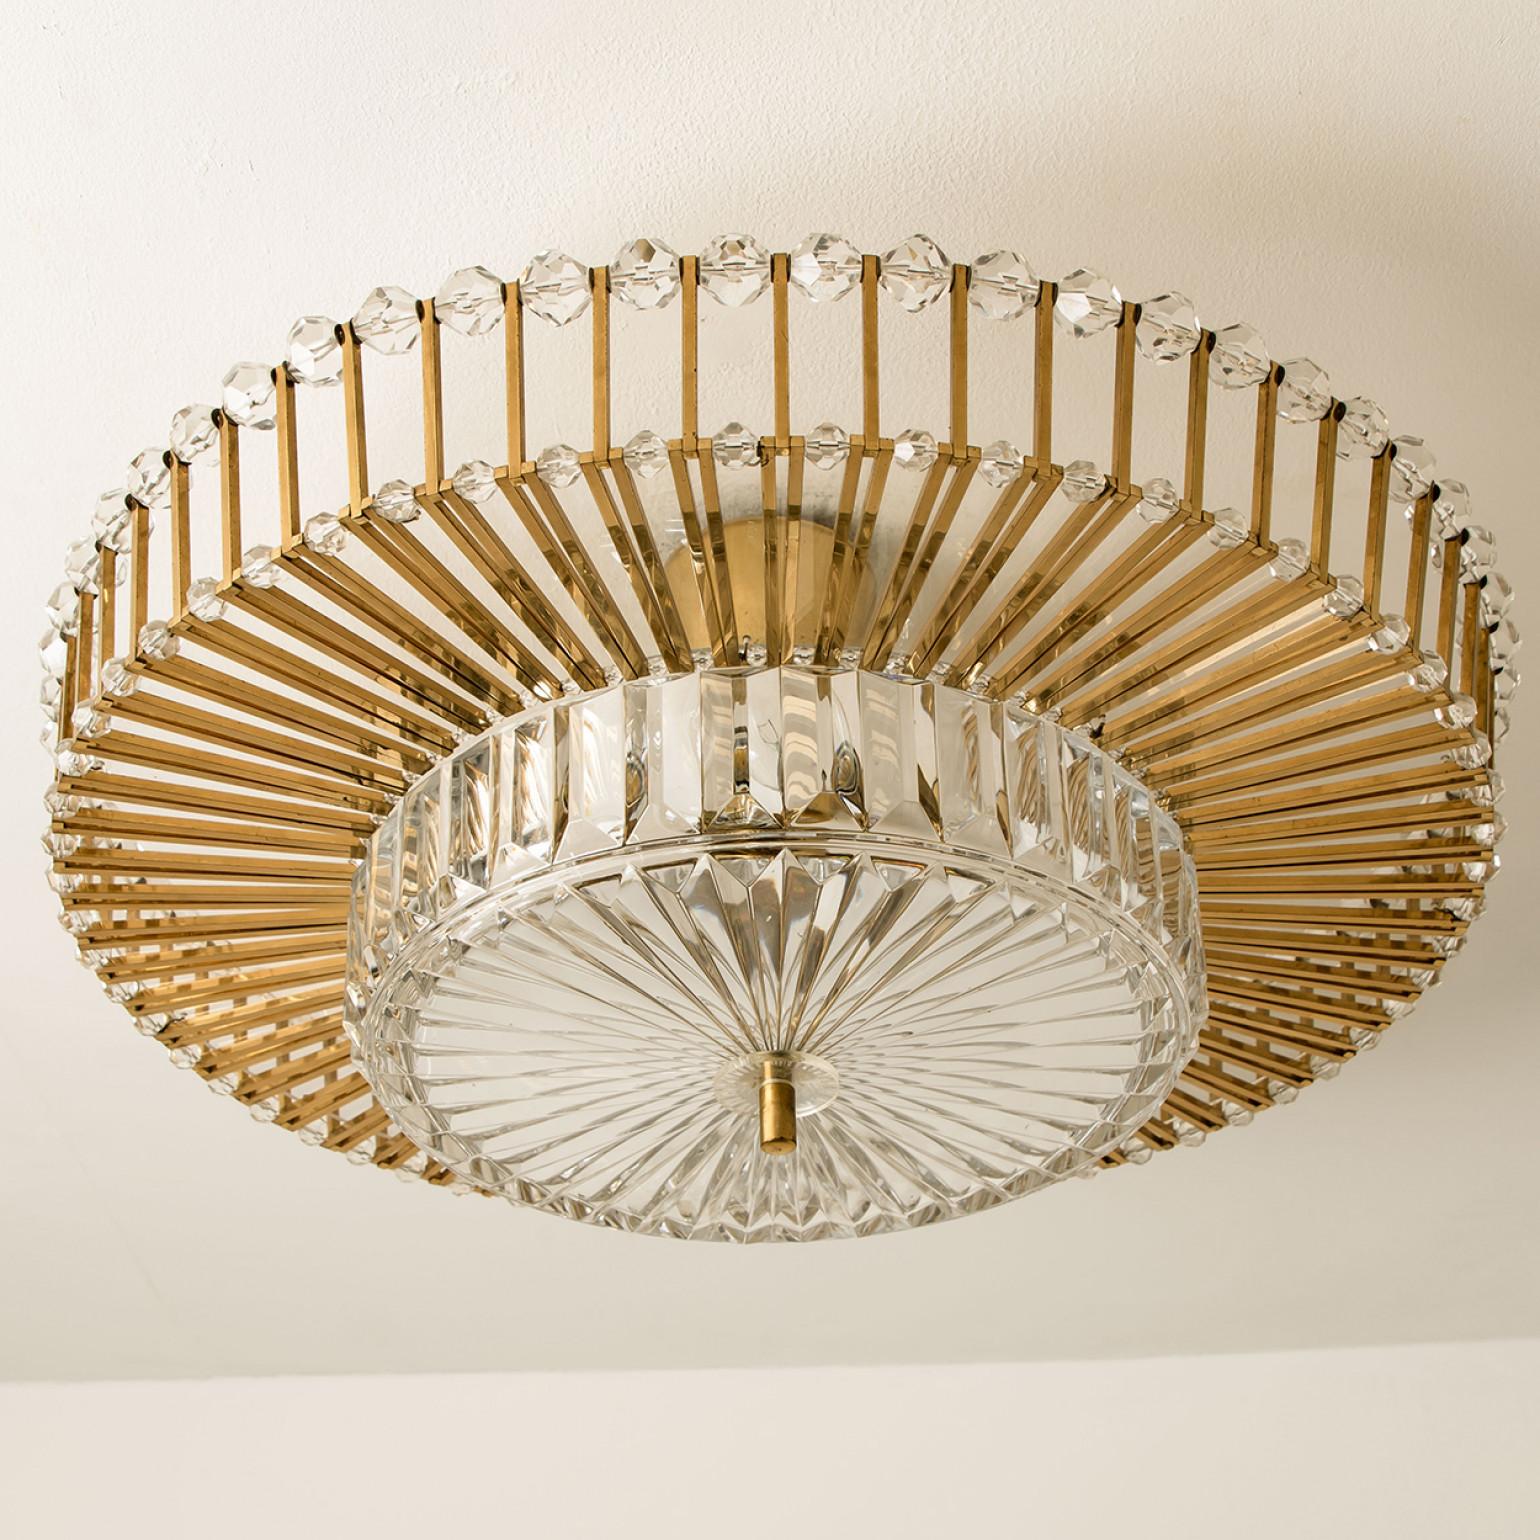 This amazing elegant flush mount was made in the 1970s by the iconic firm Ernst Palme in the 1970s. The piece shows a large quantity of brass elements, combined with glass beads and thick faceted glass shapes.

High quality and in very good